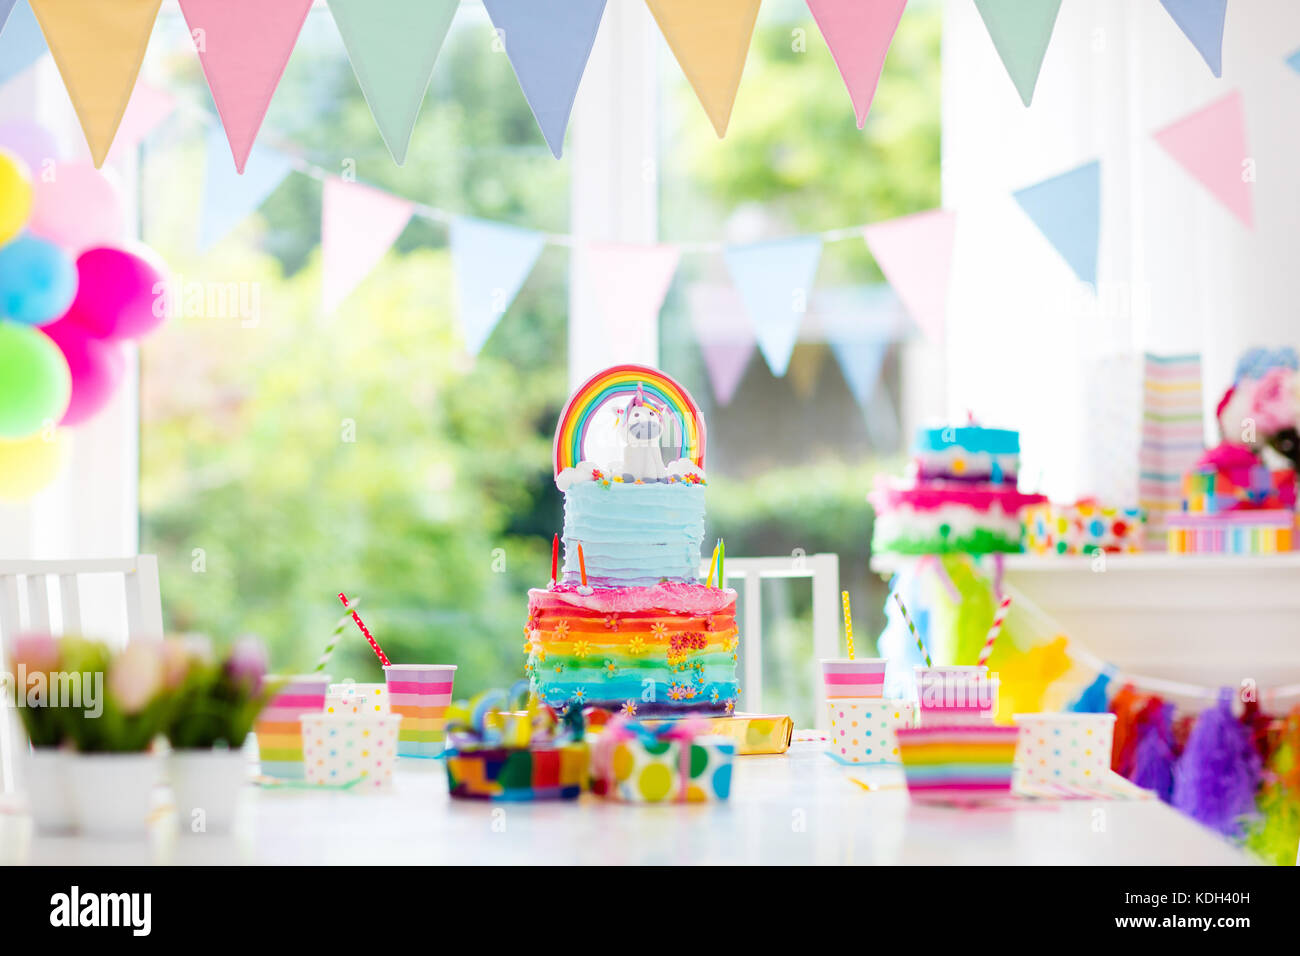 Kids birthday party decoration and cake. Decorated table for child birthday celebration. Rainbow unicorn cake for little girl. Room with festive ballo Stock Photo